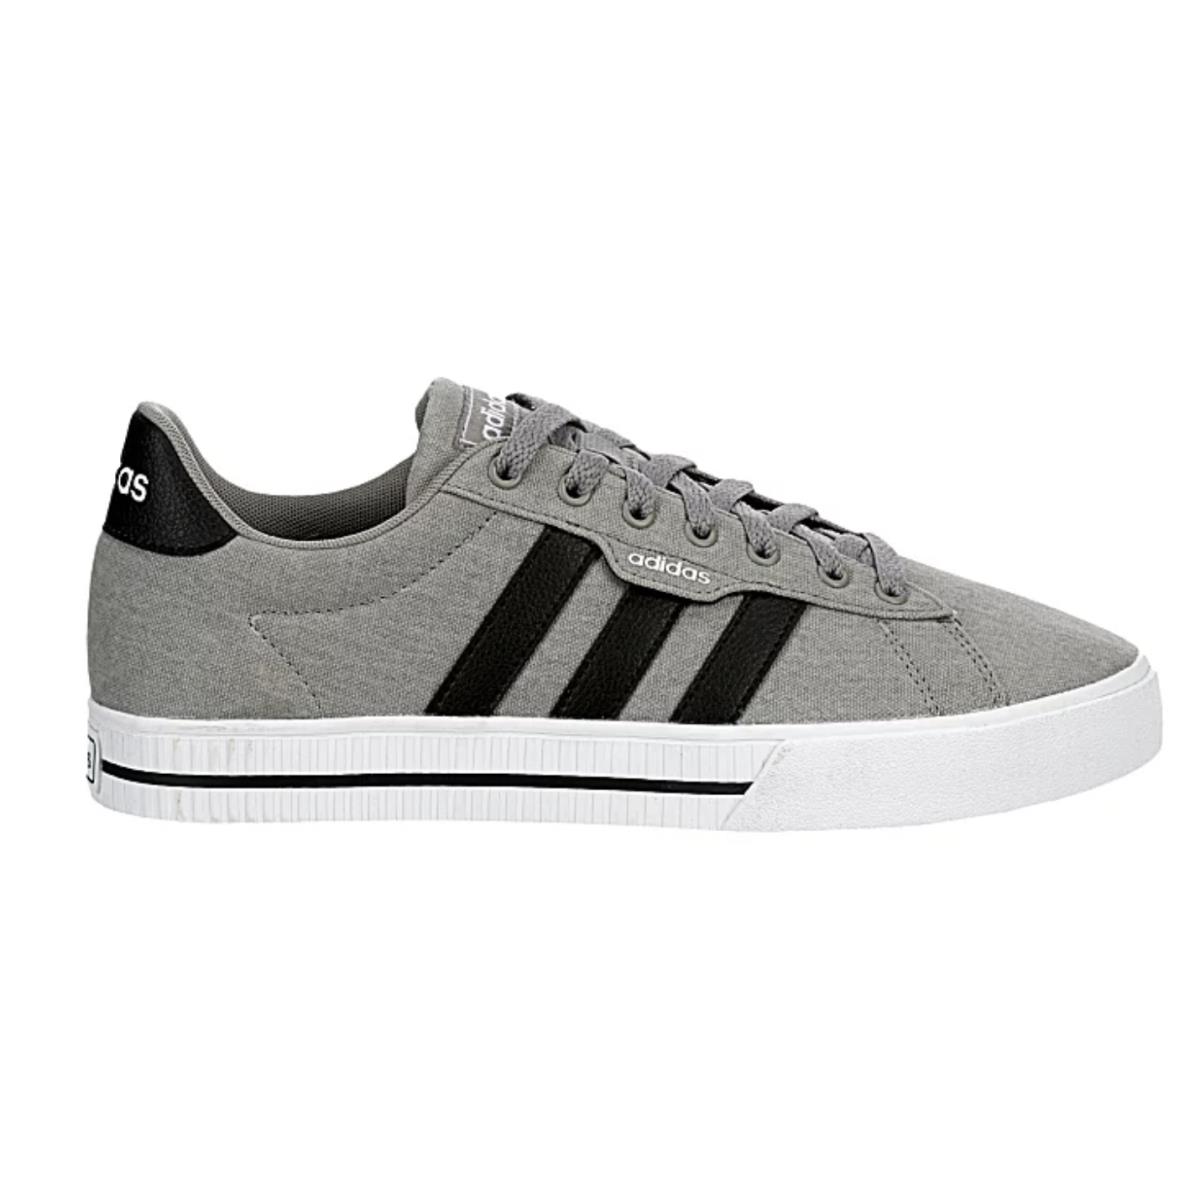 Adidas Shoes Skate Mens Daily 3.0 Athletic Sneaker Multi Color All Sizes Gray